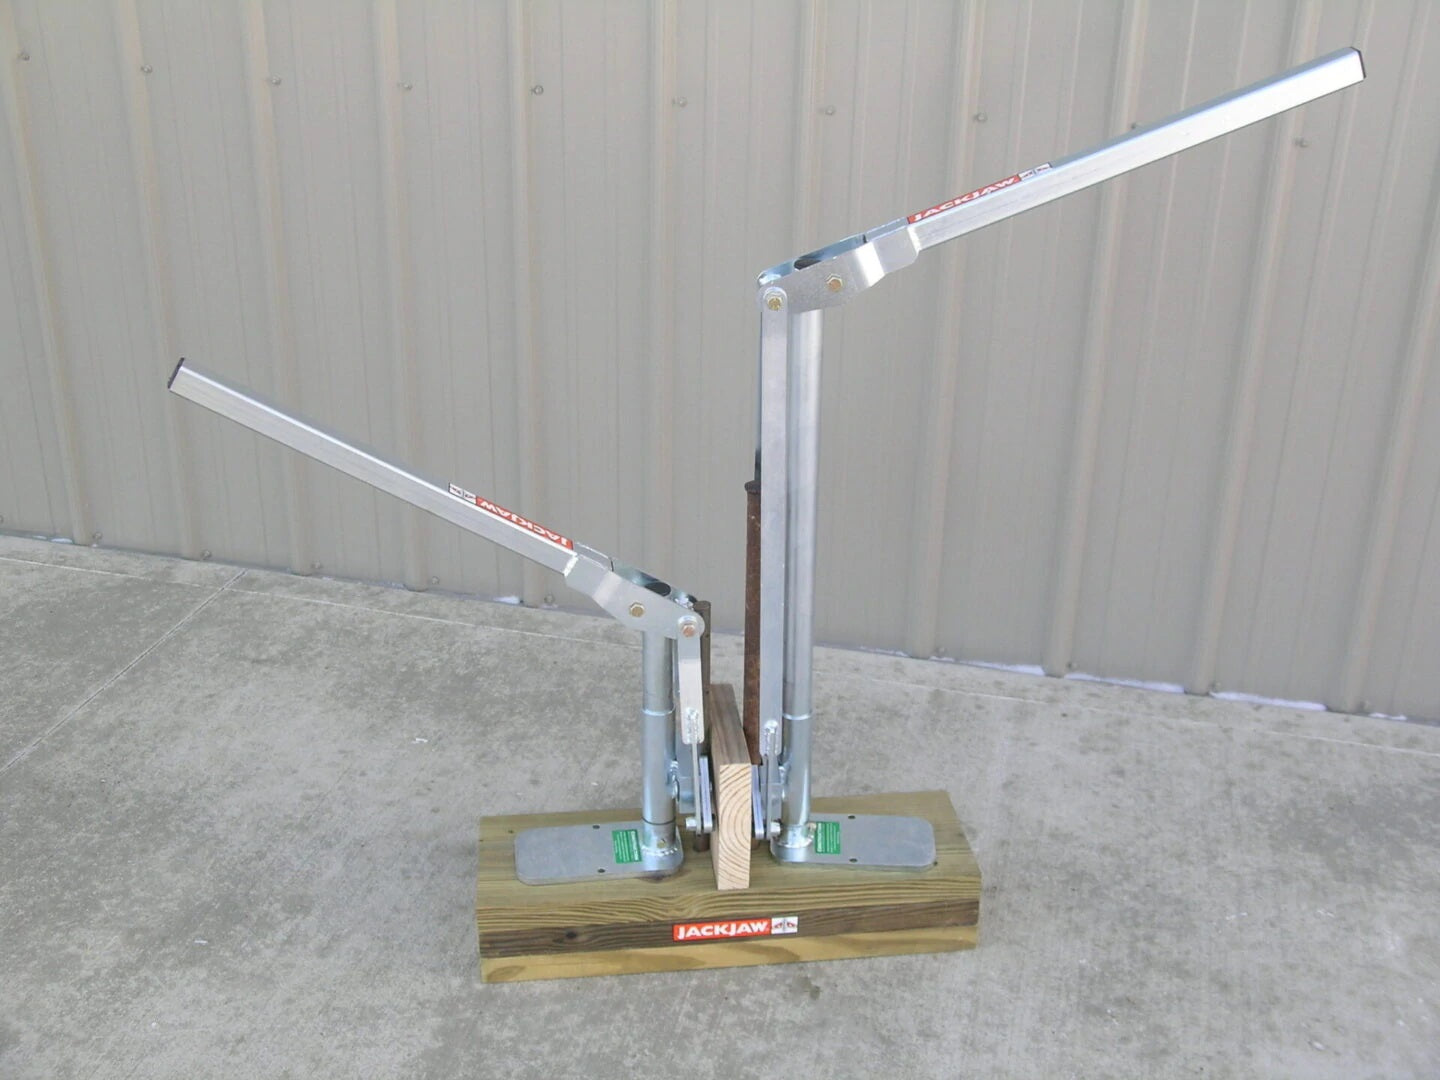 What Is A Stake Puller And How Do They Work?